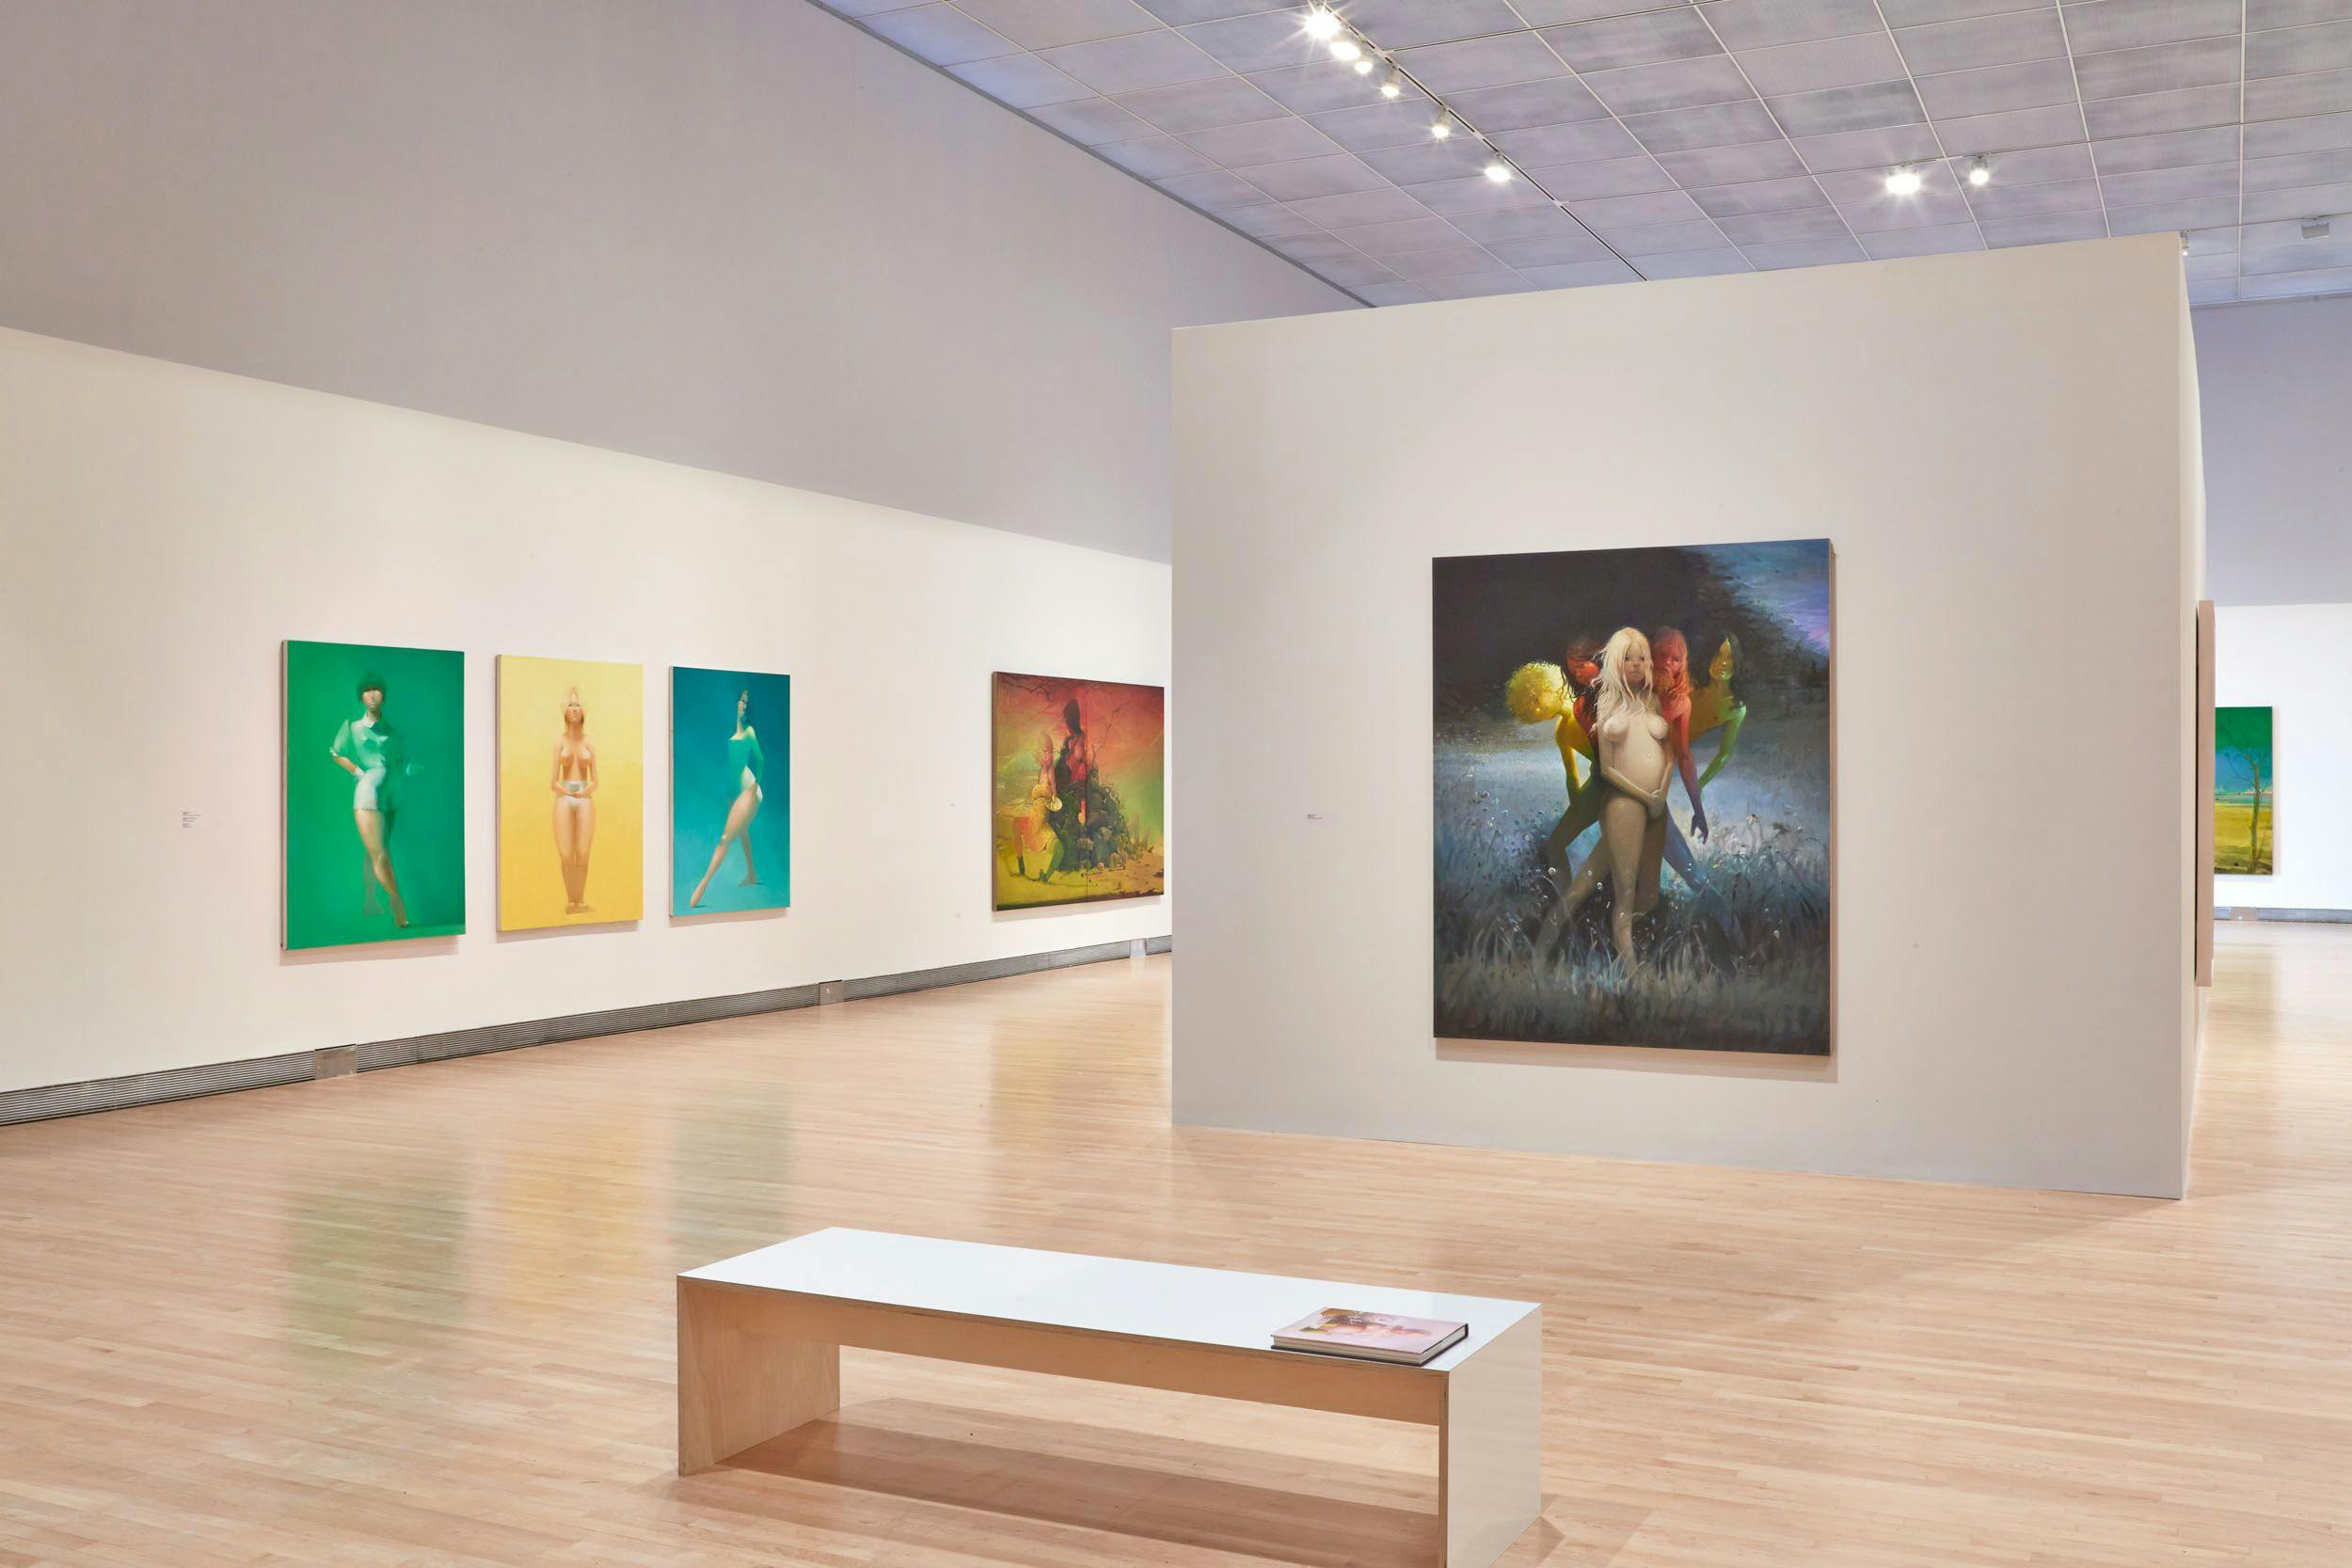 Installation view of the exhibition,¬†The Brood¬†at The Rose Art Museum, dated 2015.